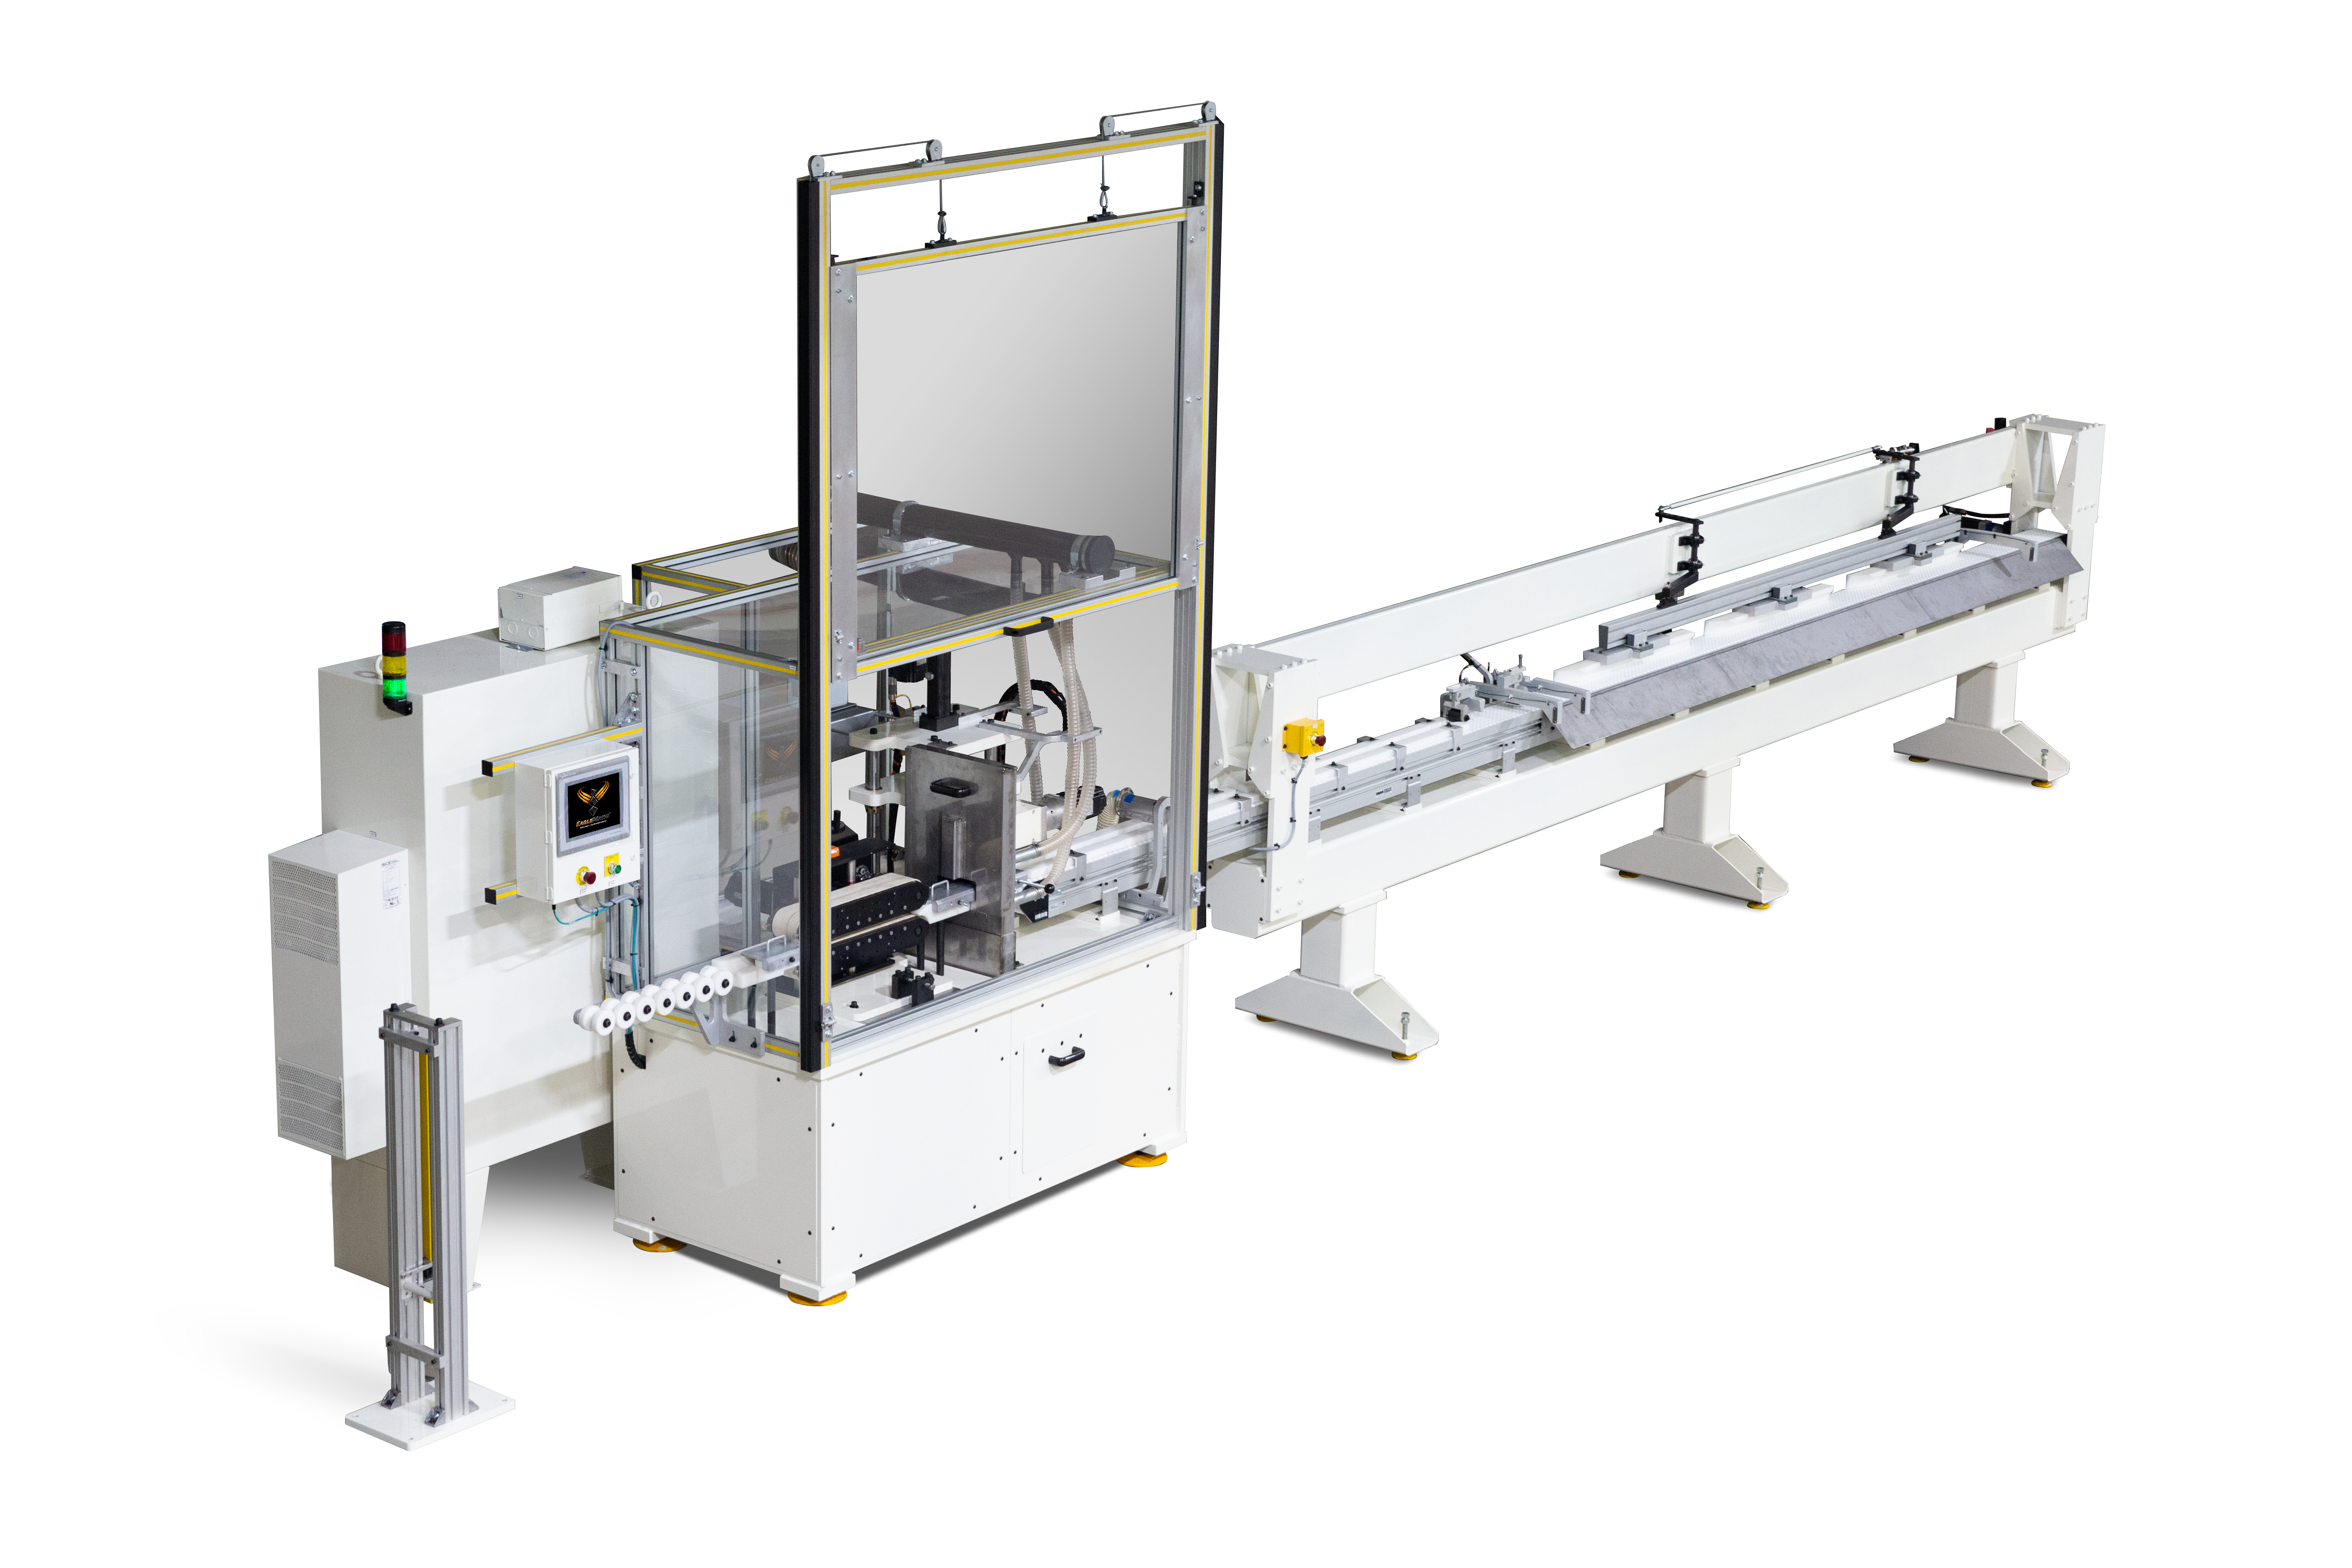 Clean White Automation Manufacturing Machine with cutting wheel HMI Pneumatic rollers